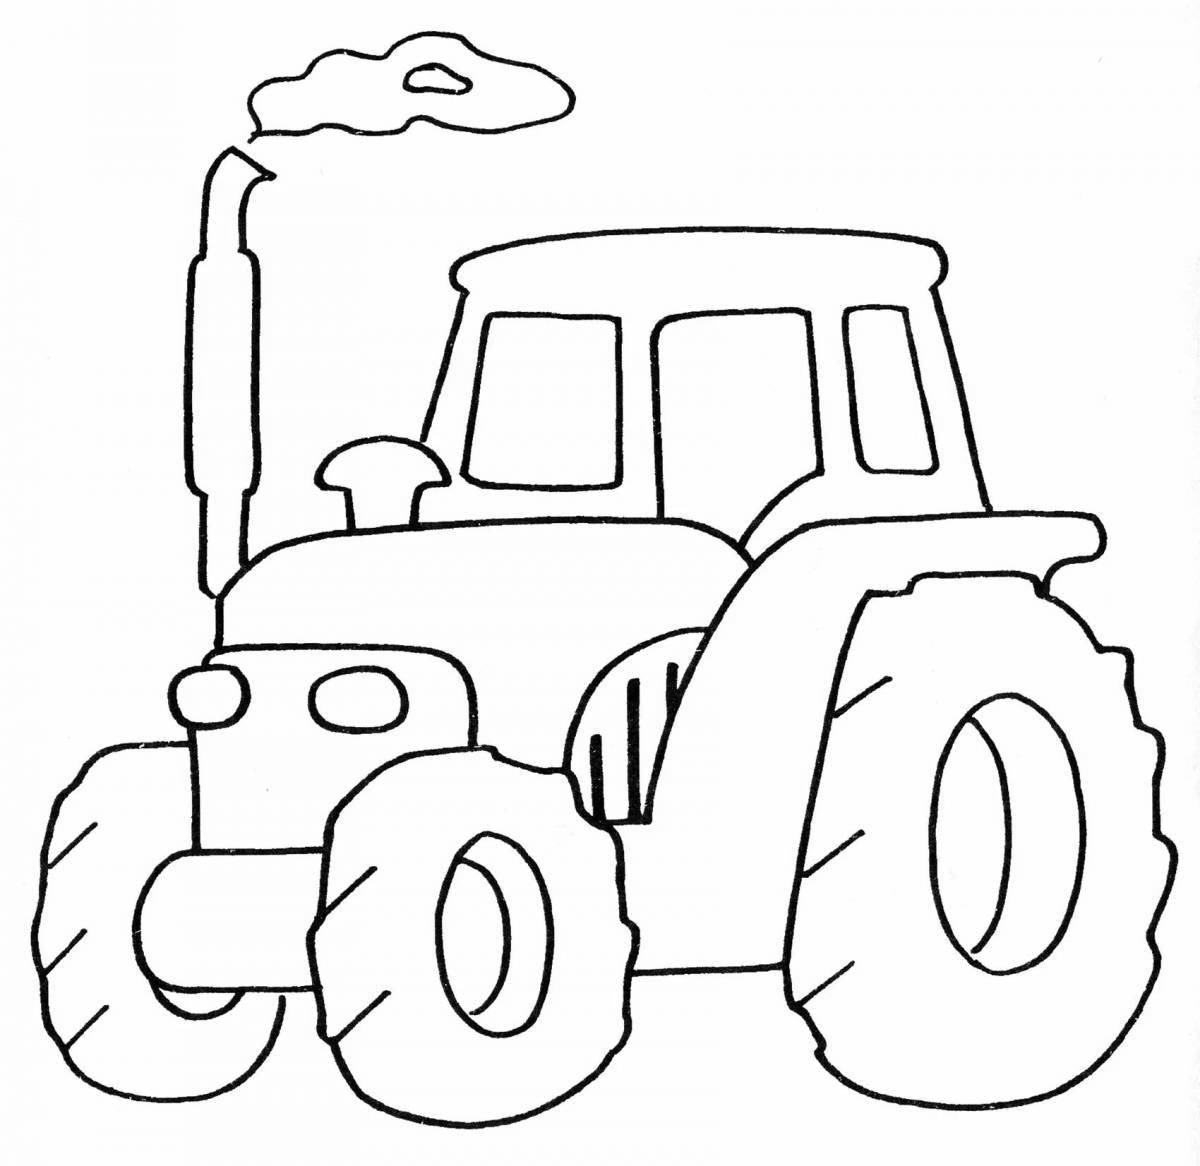 Great blue gosh tractor coloring page